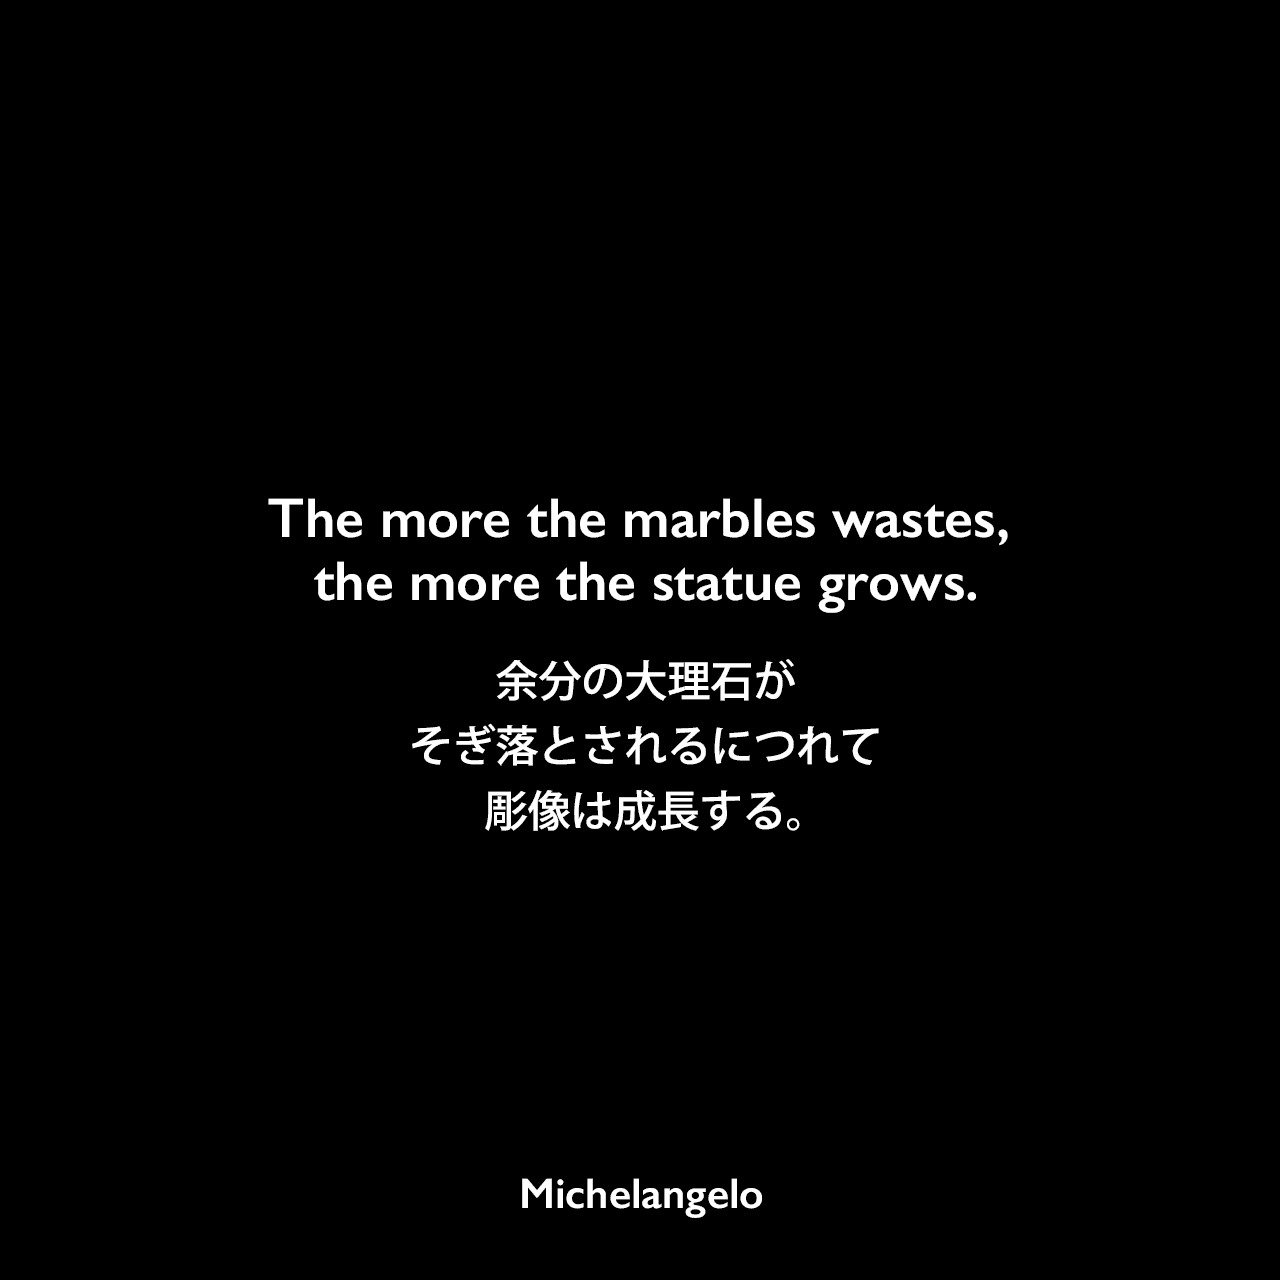 The more the marbles wastes, the more the statue grows.余分の大理石がそぎ落とされるにつれて、彫像は成長する。Michelangelo